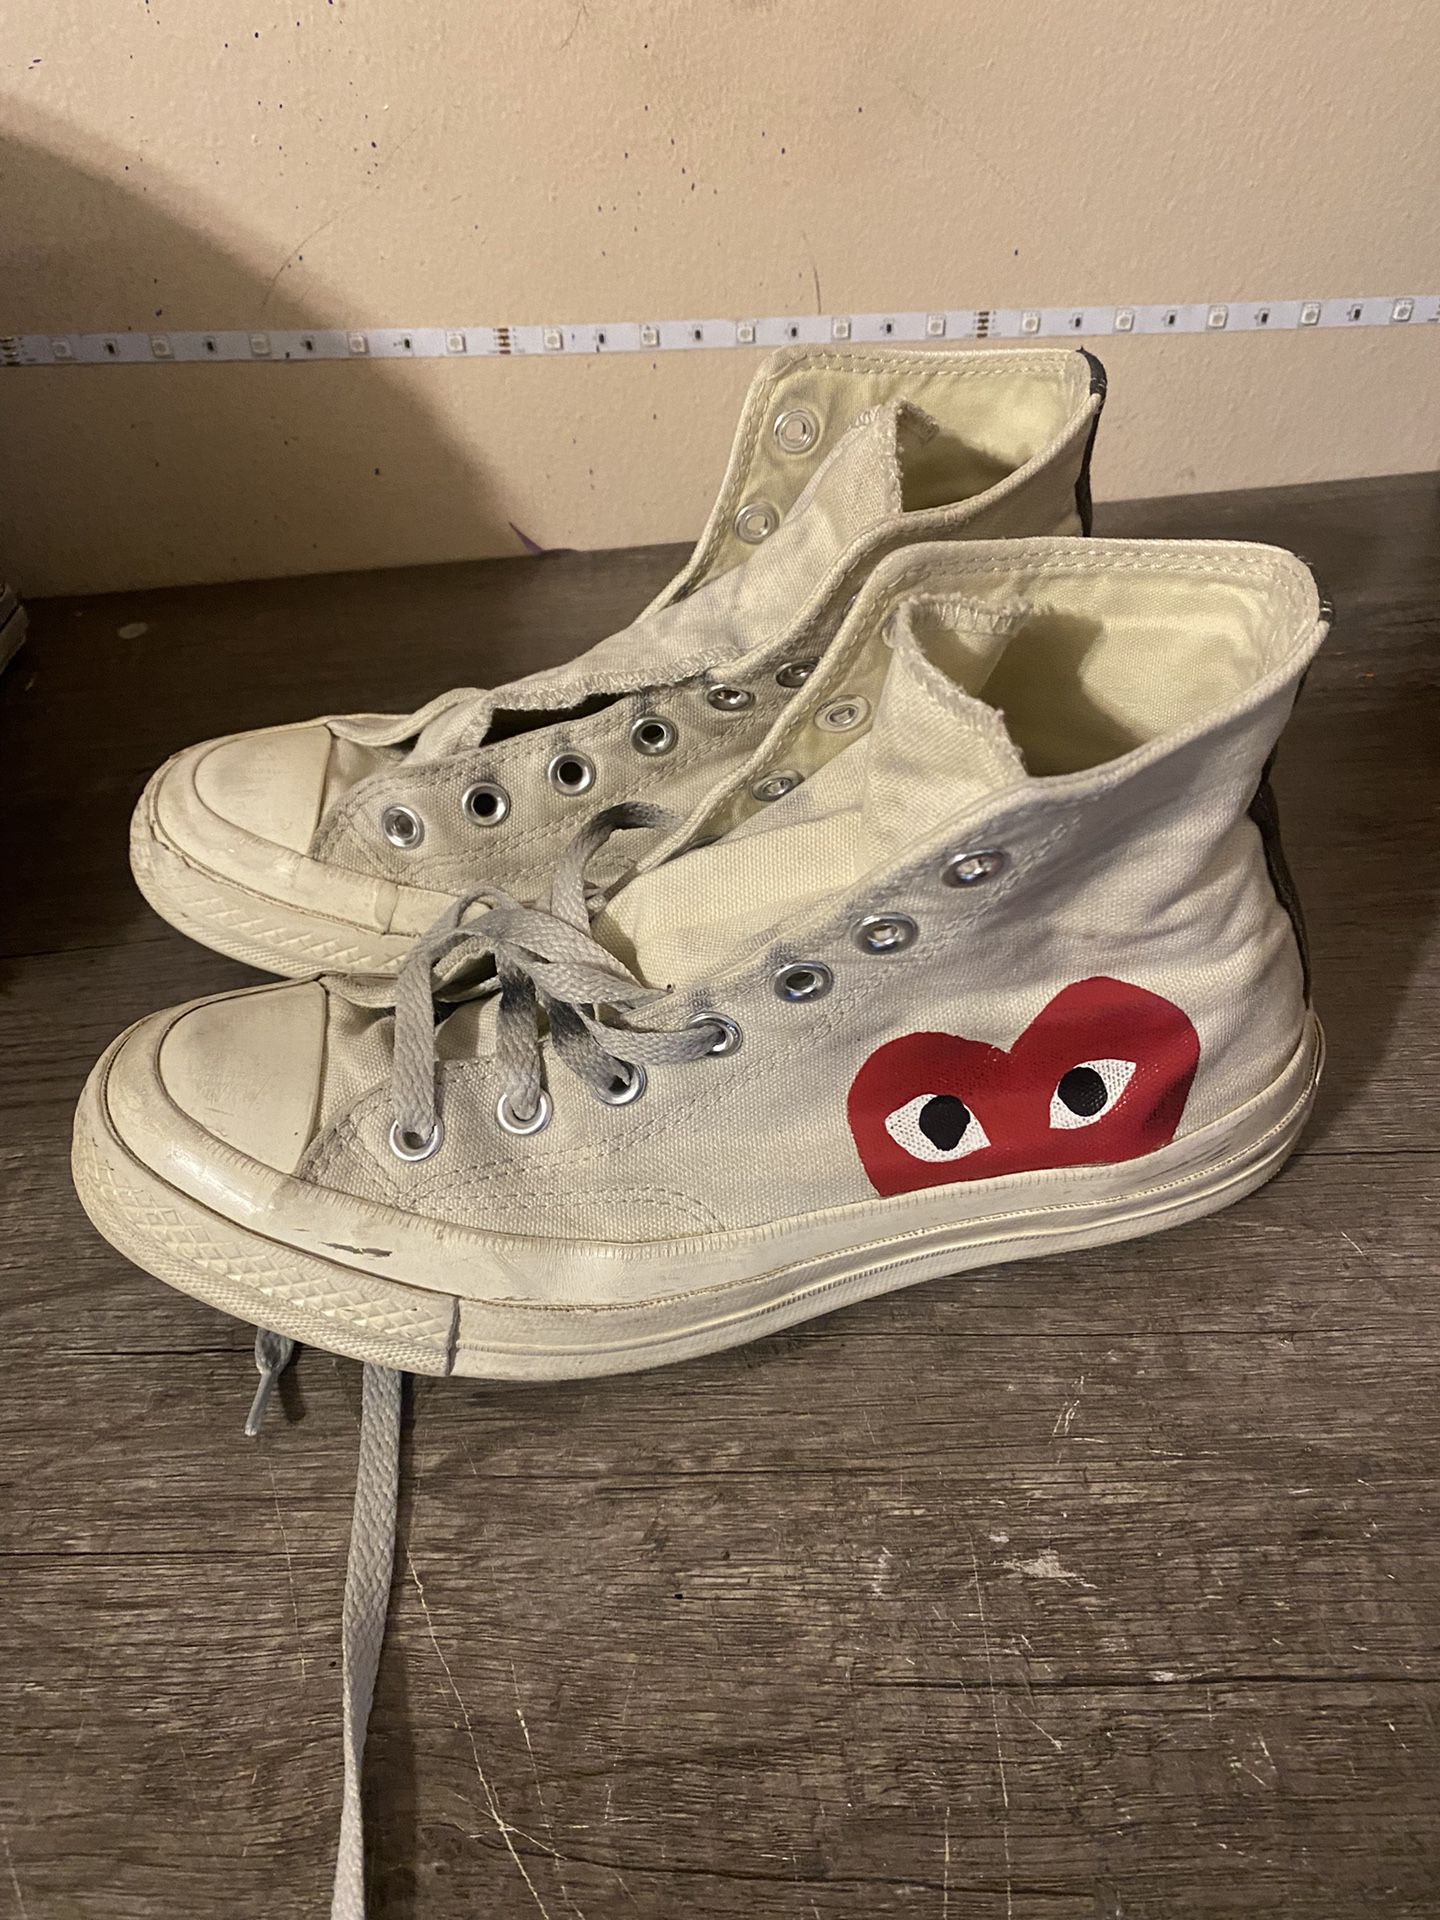 kutter tromme Passiv Size 6 Converse Chuck Taylor All Star High x Comme des Garcons Milk 2015  for Sale in Los Angeles, CA - OfferUp